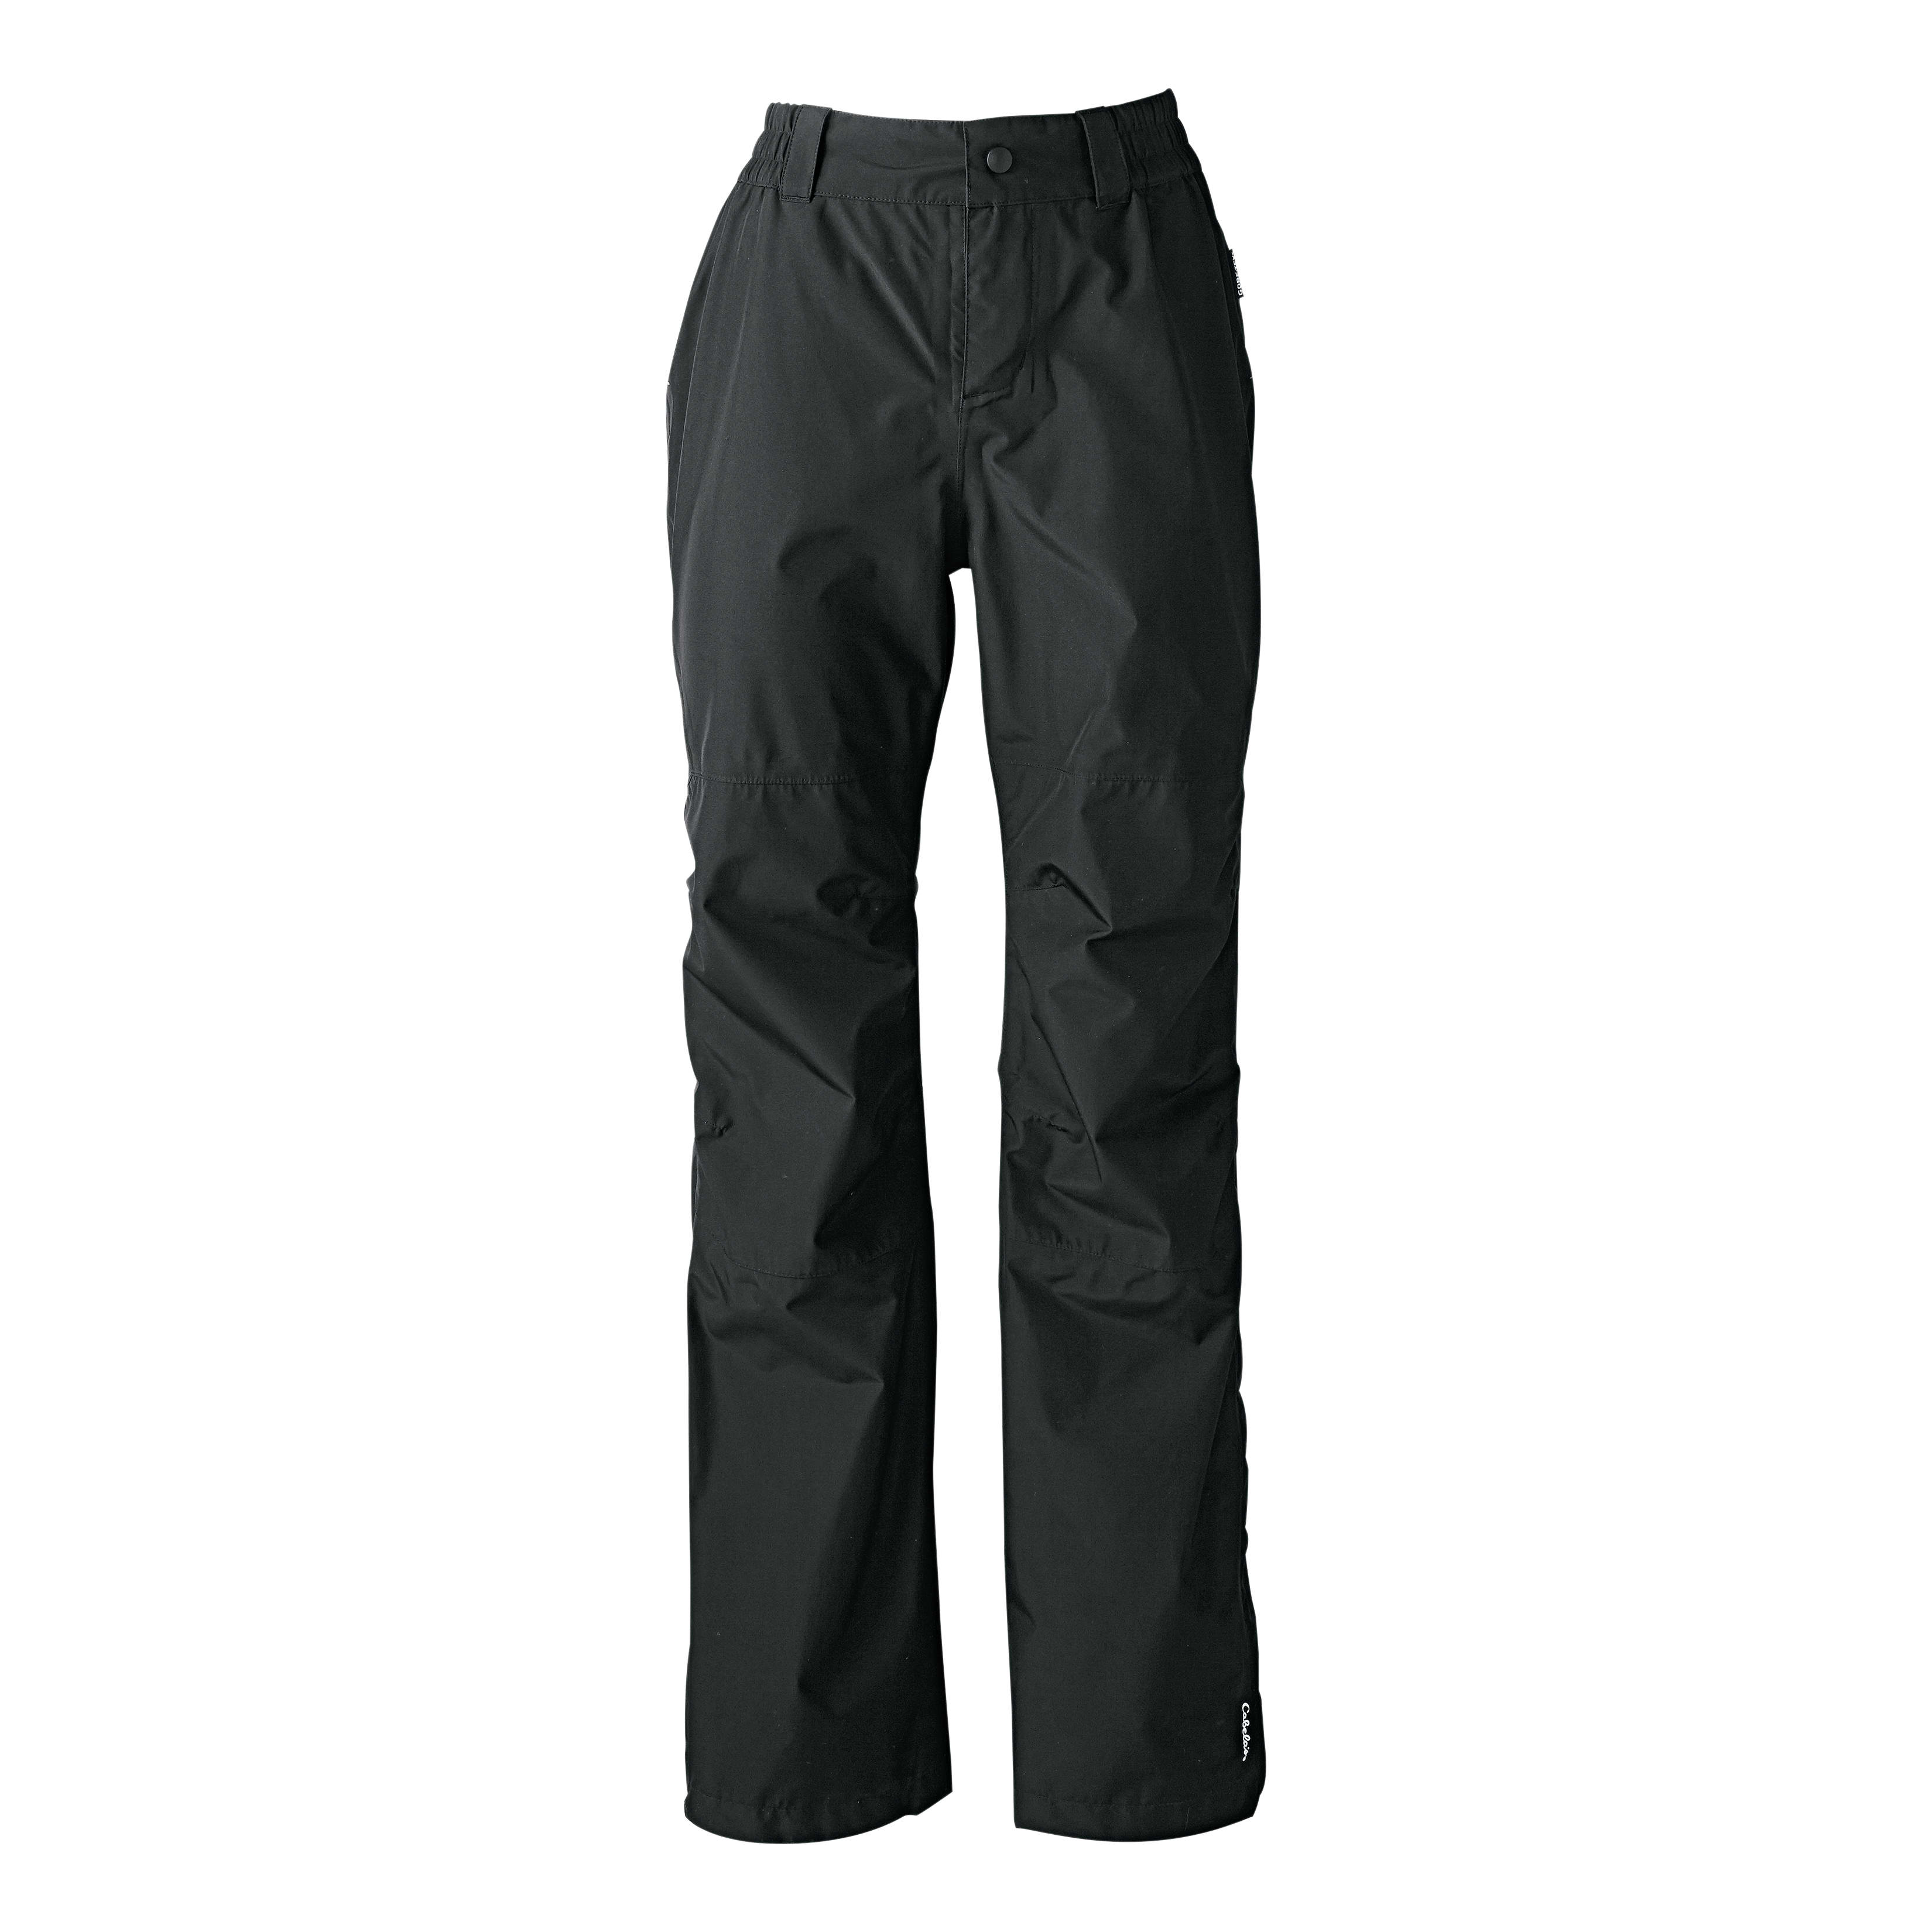 THE NORTH FACE Pants Womens Small Black Waterproof Rain Hyvent DT